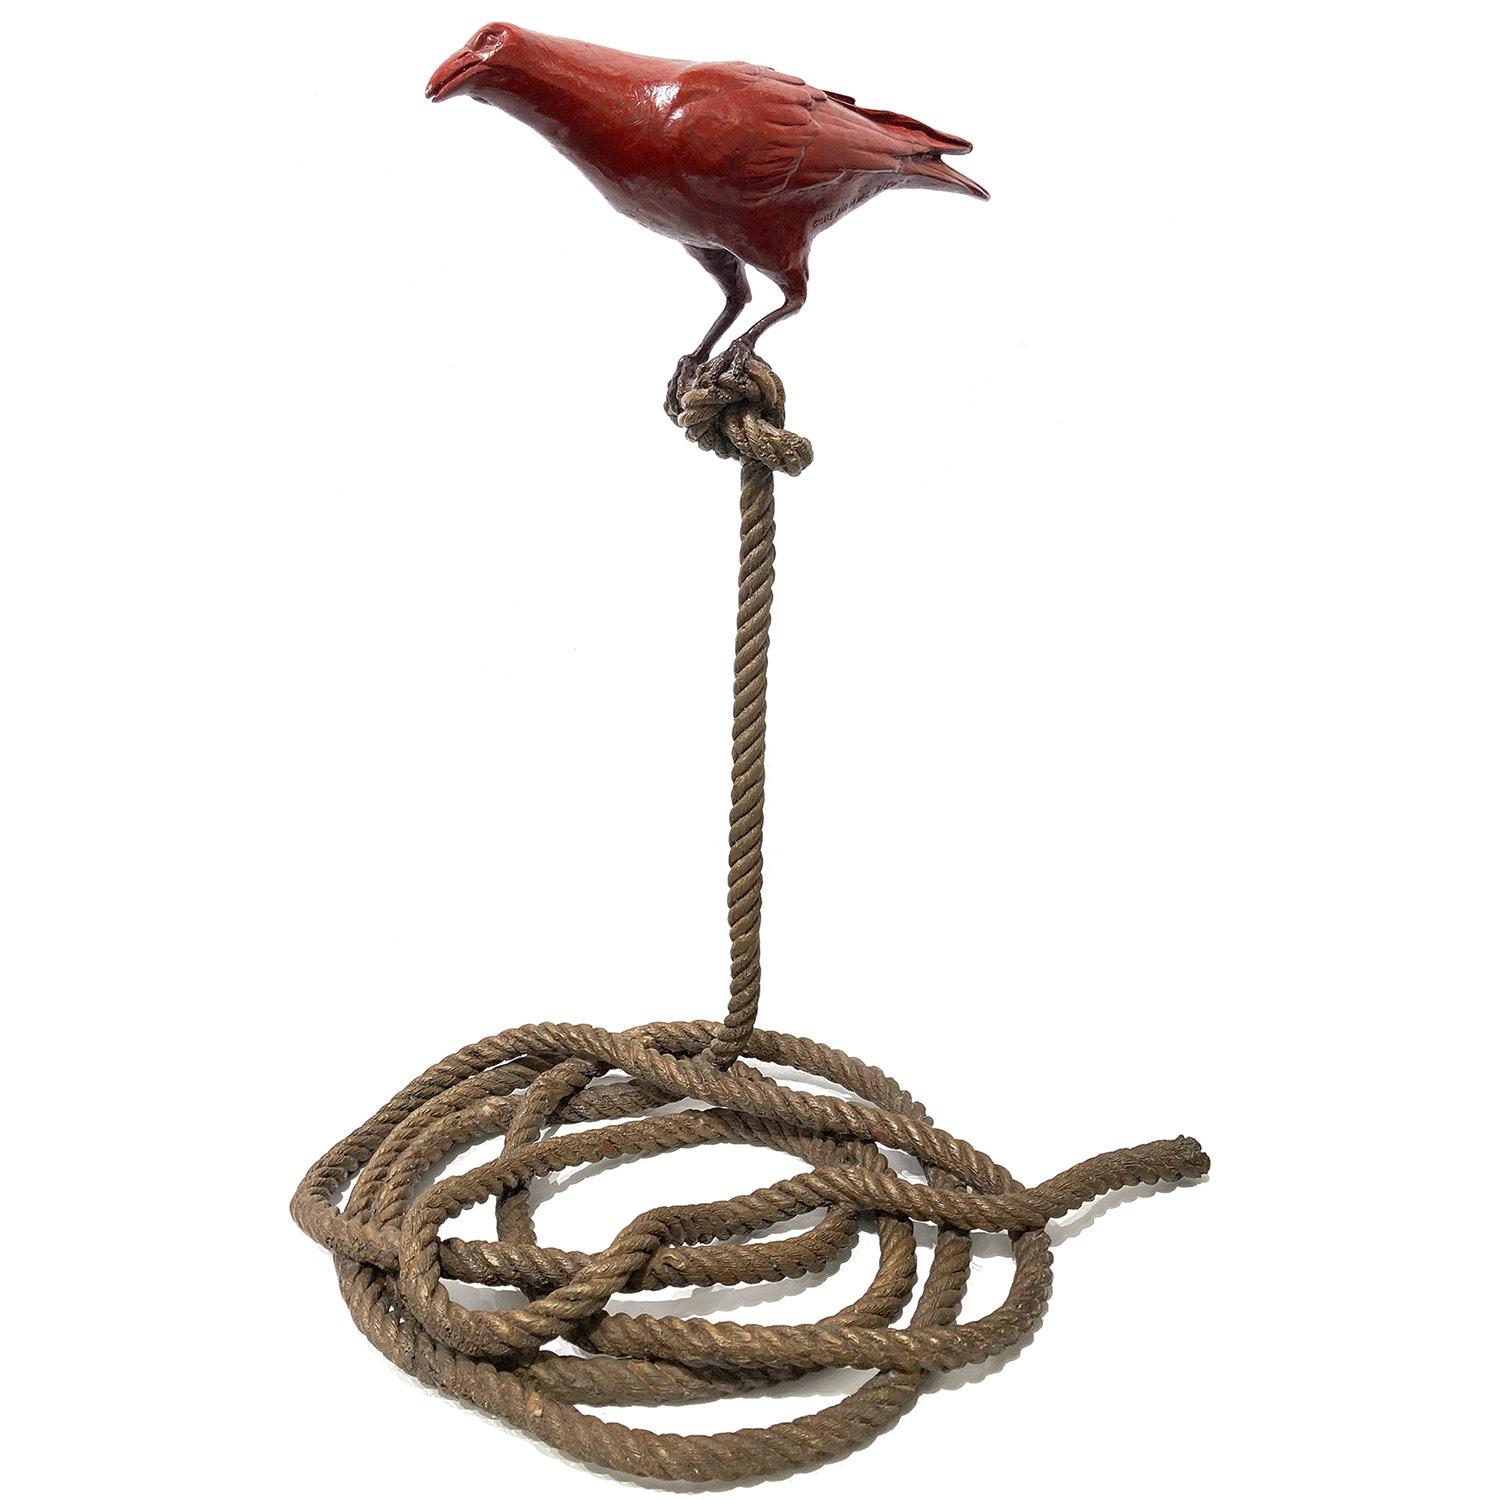 Gillie and Marc Schattner Abstract Sculpture - "Harold, The Magpie on Rope" Bird Bronze Sculpture with Bronze and Red Patina